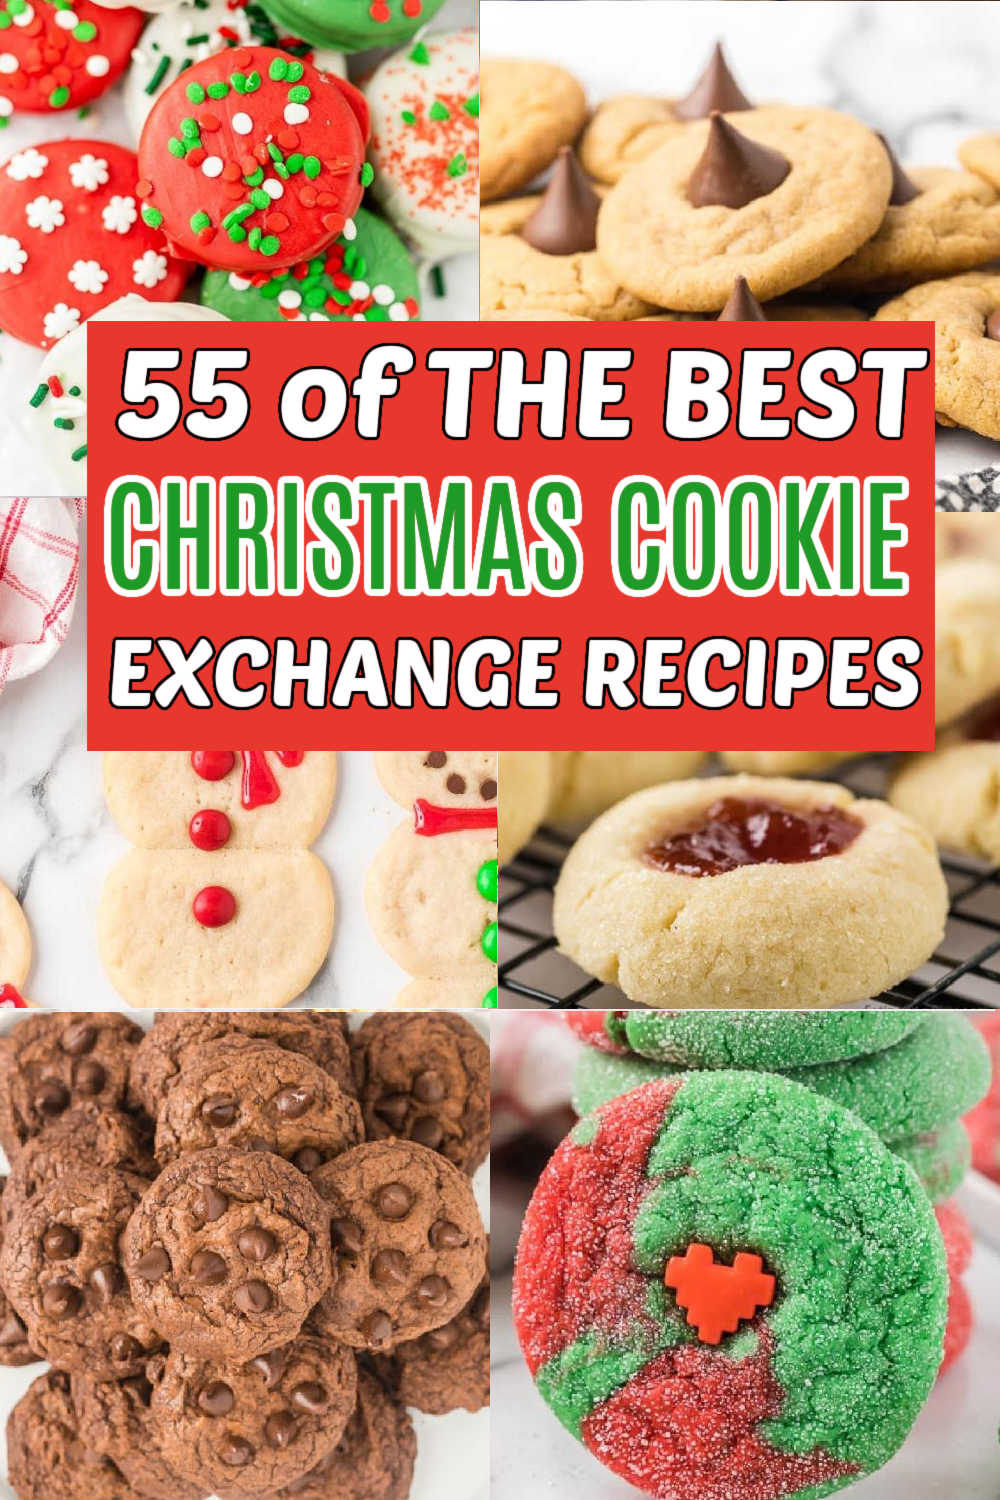 The holidays is the perfect time to do Christmas Cookie Exchange. These 55 Cookie Recipes are sure to please your friends and family. Learn how to host the best Christmas Cookie Exchange with simple tips. #eatingonadime #christmascookieexchange #holidayparty #cookieexchange